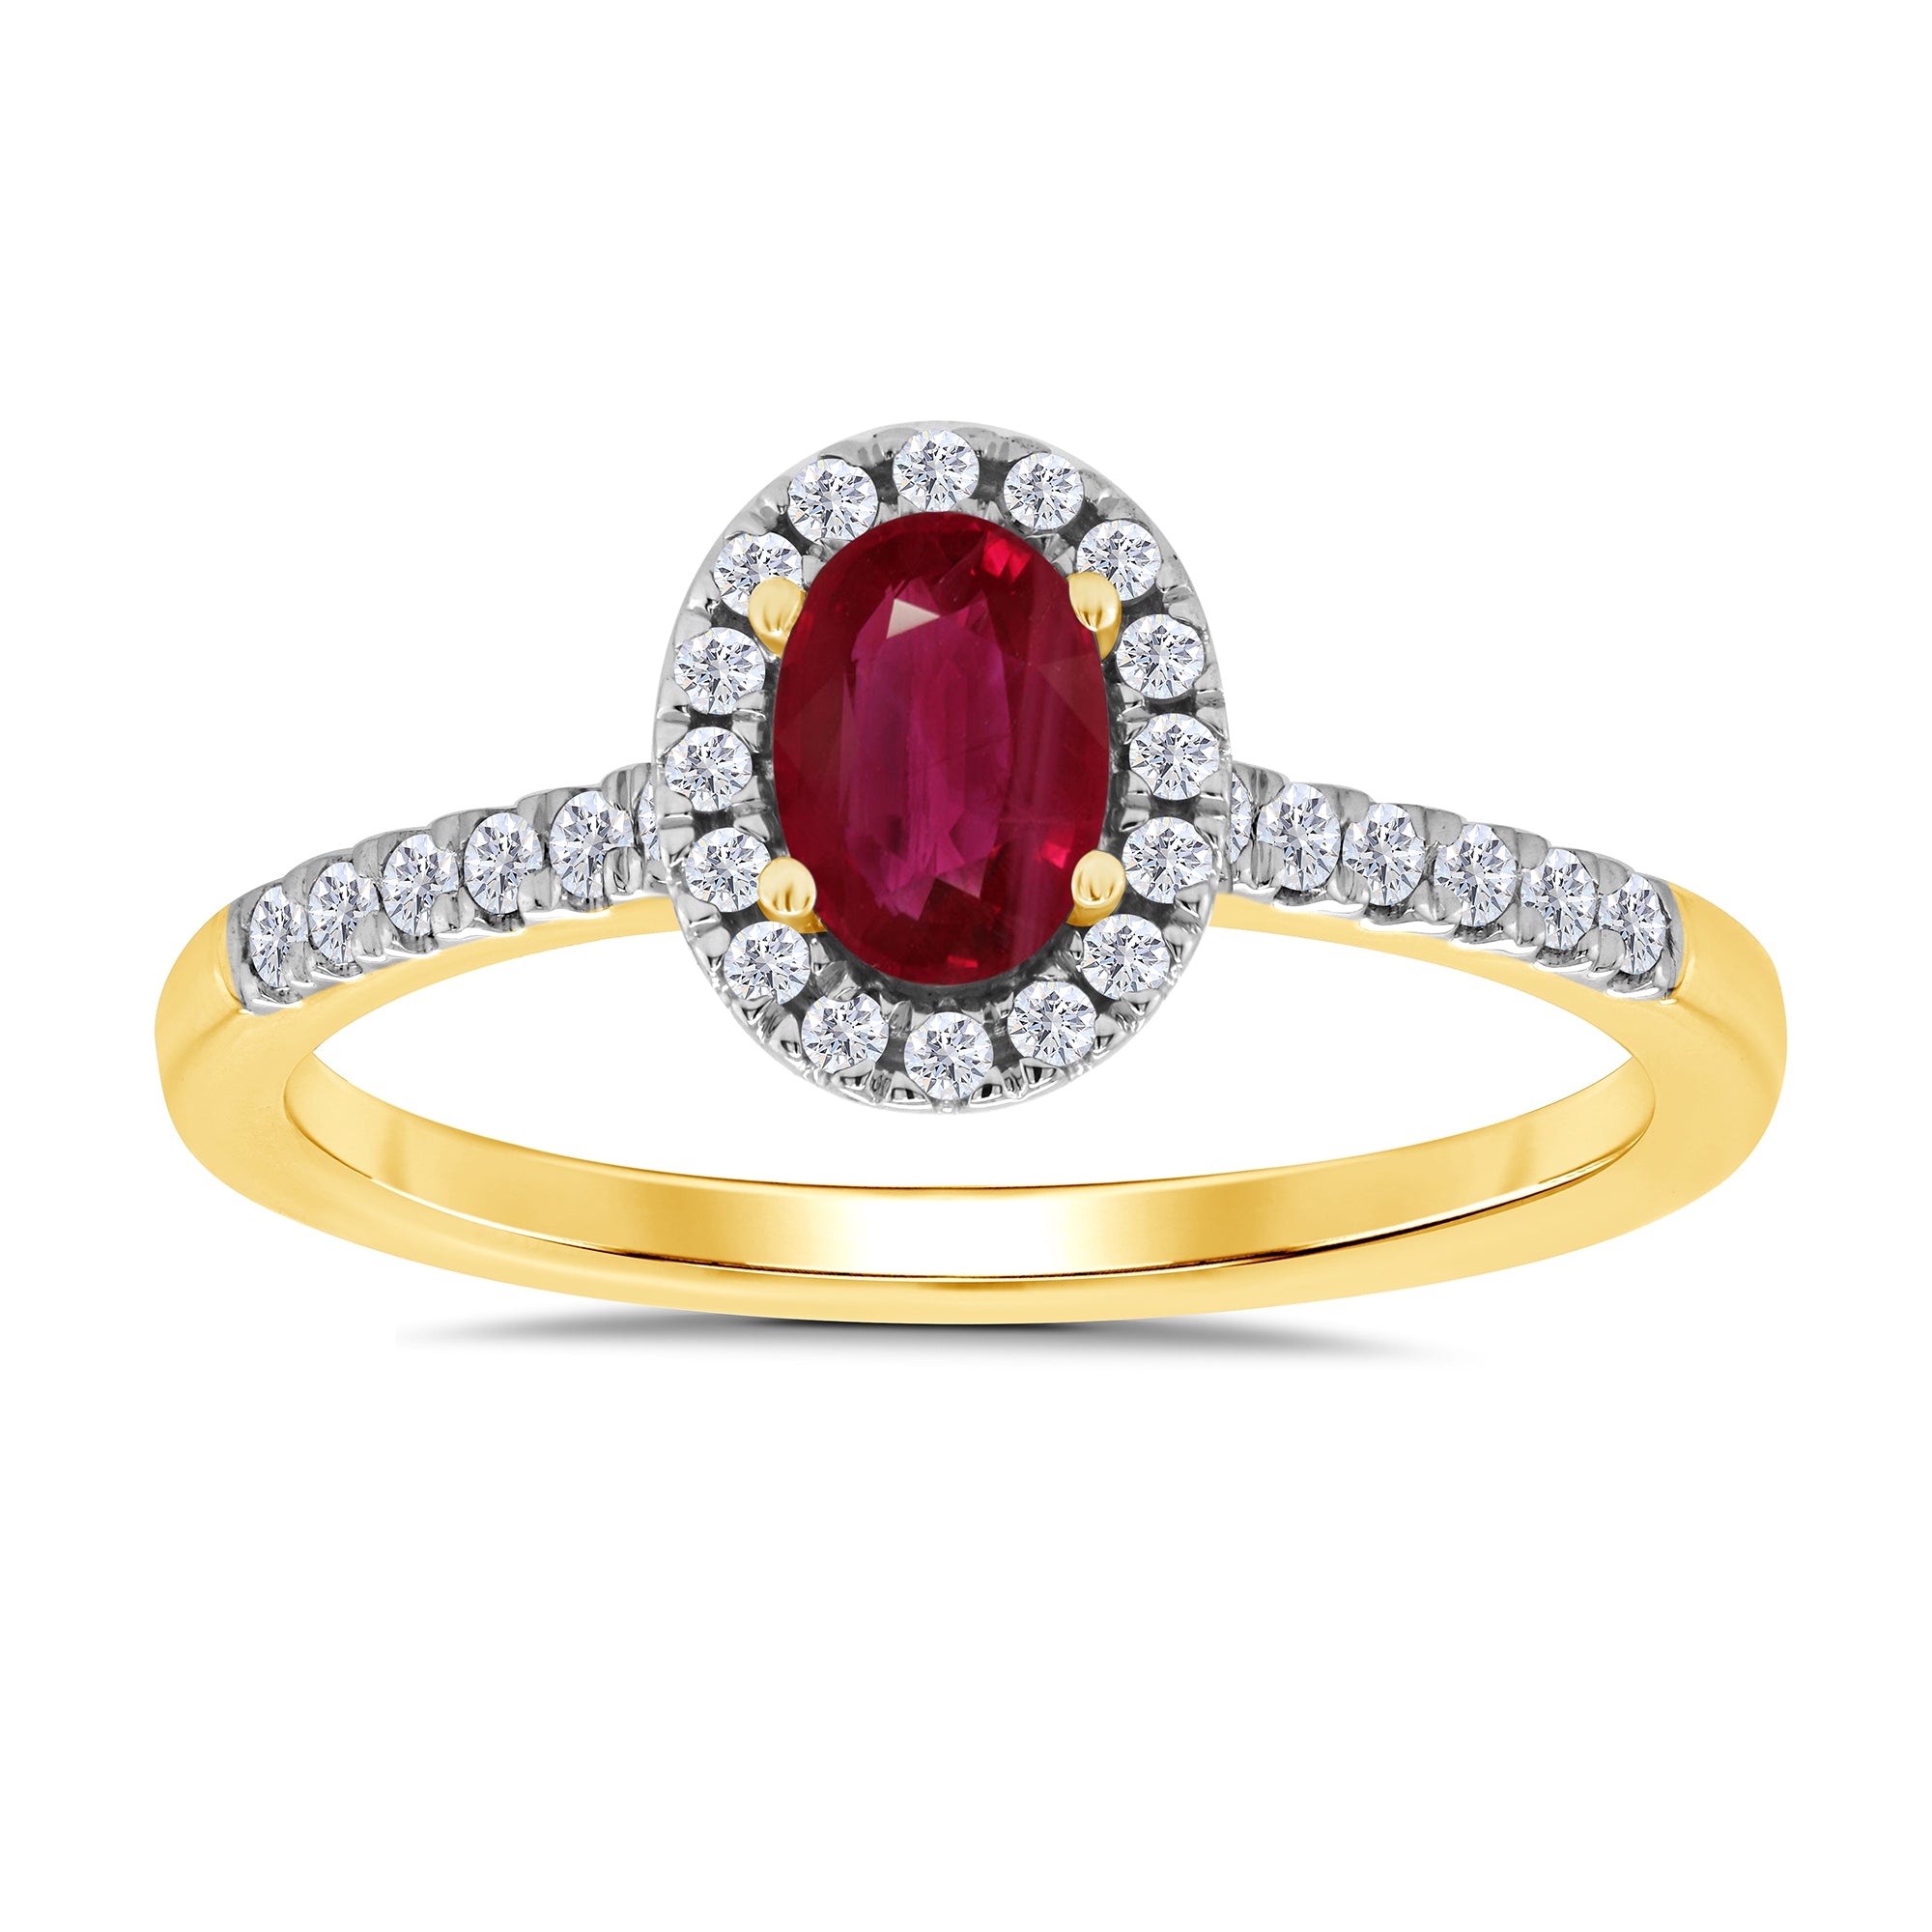 9ct gold 6x4mm oval ruby & diamond cluster ring with diamond set shoulders 0.20ct